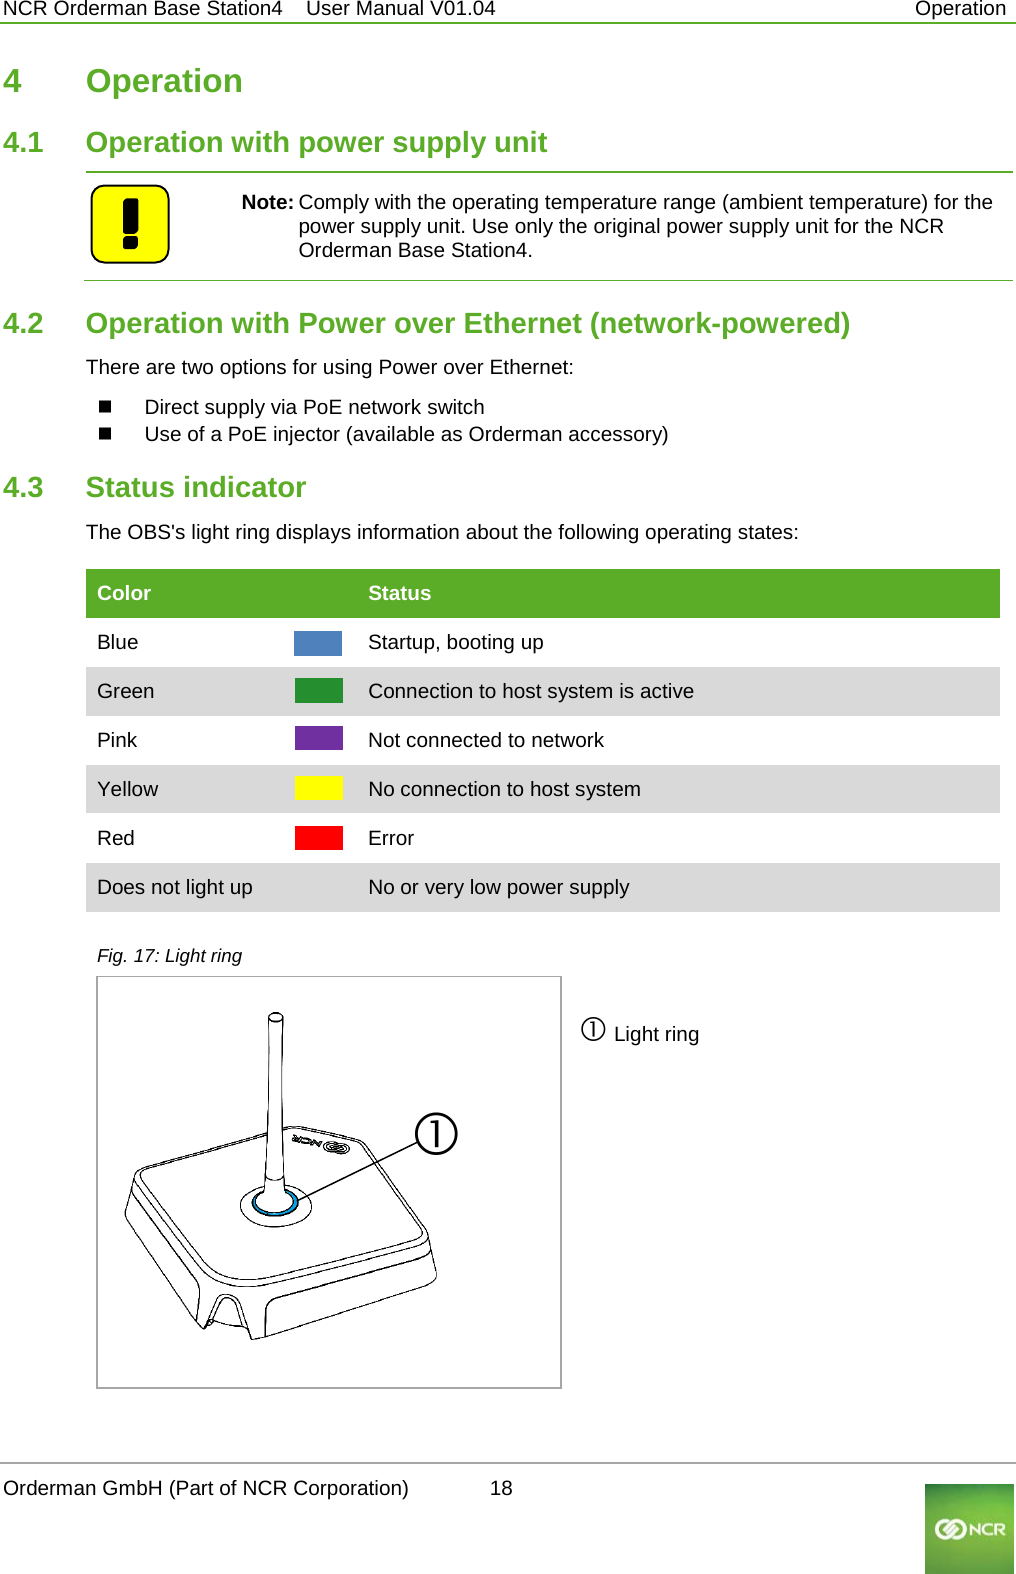  NCR Orderman Base Station4    User Manual V01.04     Operation 4  Operation 4.1 Operation with power supply unit   Note: Comply with the operating temperature range (ambient temperature) for the power supply unit. Use only the original power supply unit for the NCR Orderman Base Station4. 4.2 Operation with Power over Ethernet (network-powered) There are two options for using Power over Ethernet:  Direct supply via PoE network switch  Use of a PoE injector (available as Orderman accessory)  4.3 Status indicator The OBS&apos;s light ring displays information about the following operating states: Color    Status Blue    Startup, booting up Green    Connection to host system is active Pink    Not connected to network Yellow      No connection to host system Red    Error Does not light up    No or very low power supply  Fig. 17: Light ring   Light ring Orderman GmbH (Part of NCR Corporation)          18                                